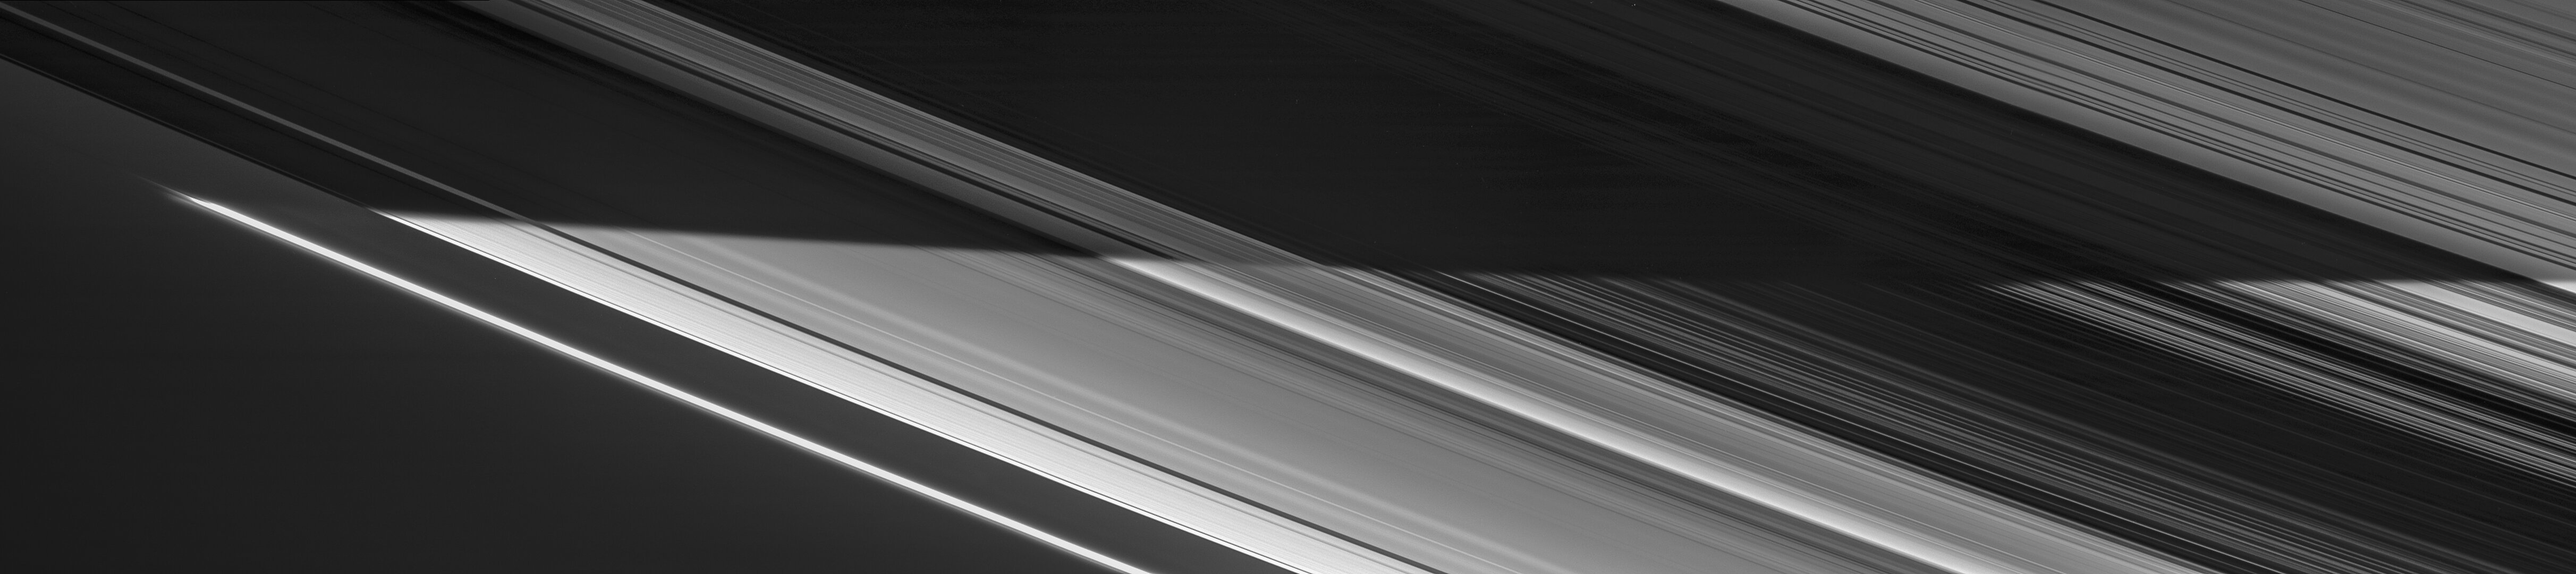 Dividing night from day on Saturn's rings